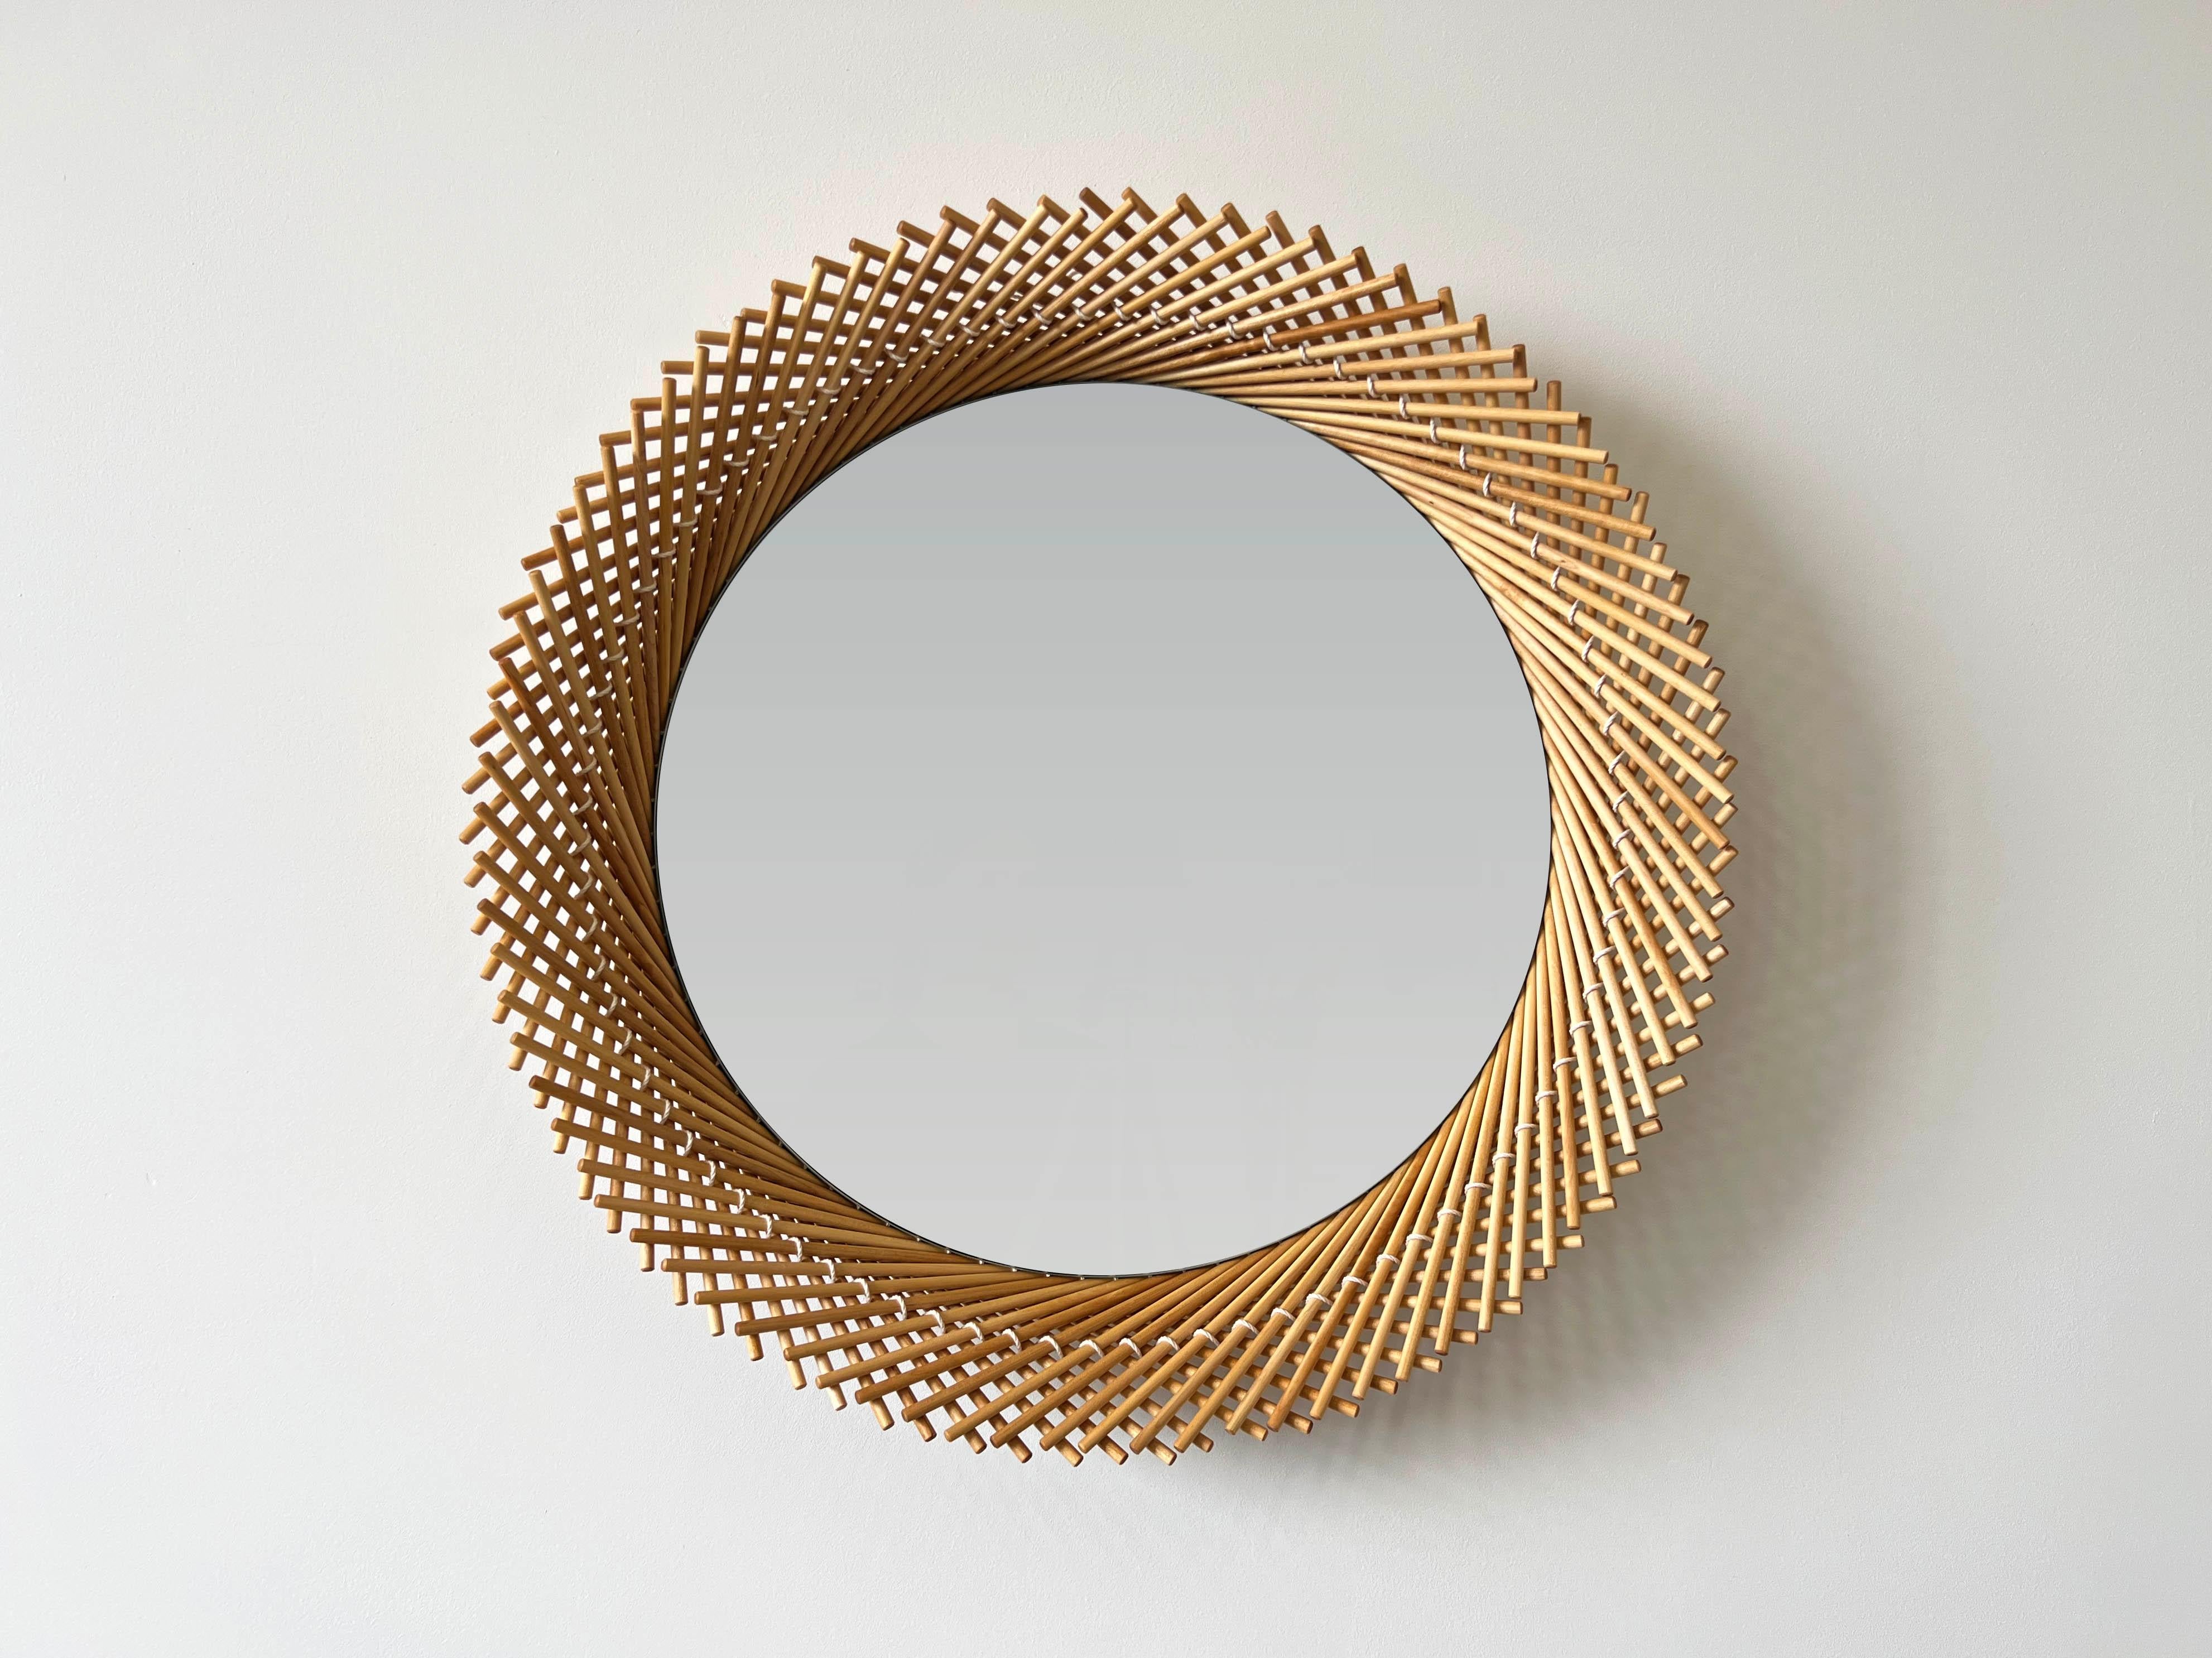 The Mooda Mirror is composed of a set of dowels stitched together to create a beautiful geometric edge around the glass. The mirror in turn reflects the dowels along its circumference, completing the traditional form of the Mooda. 

Available in two